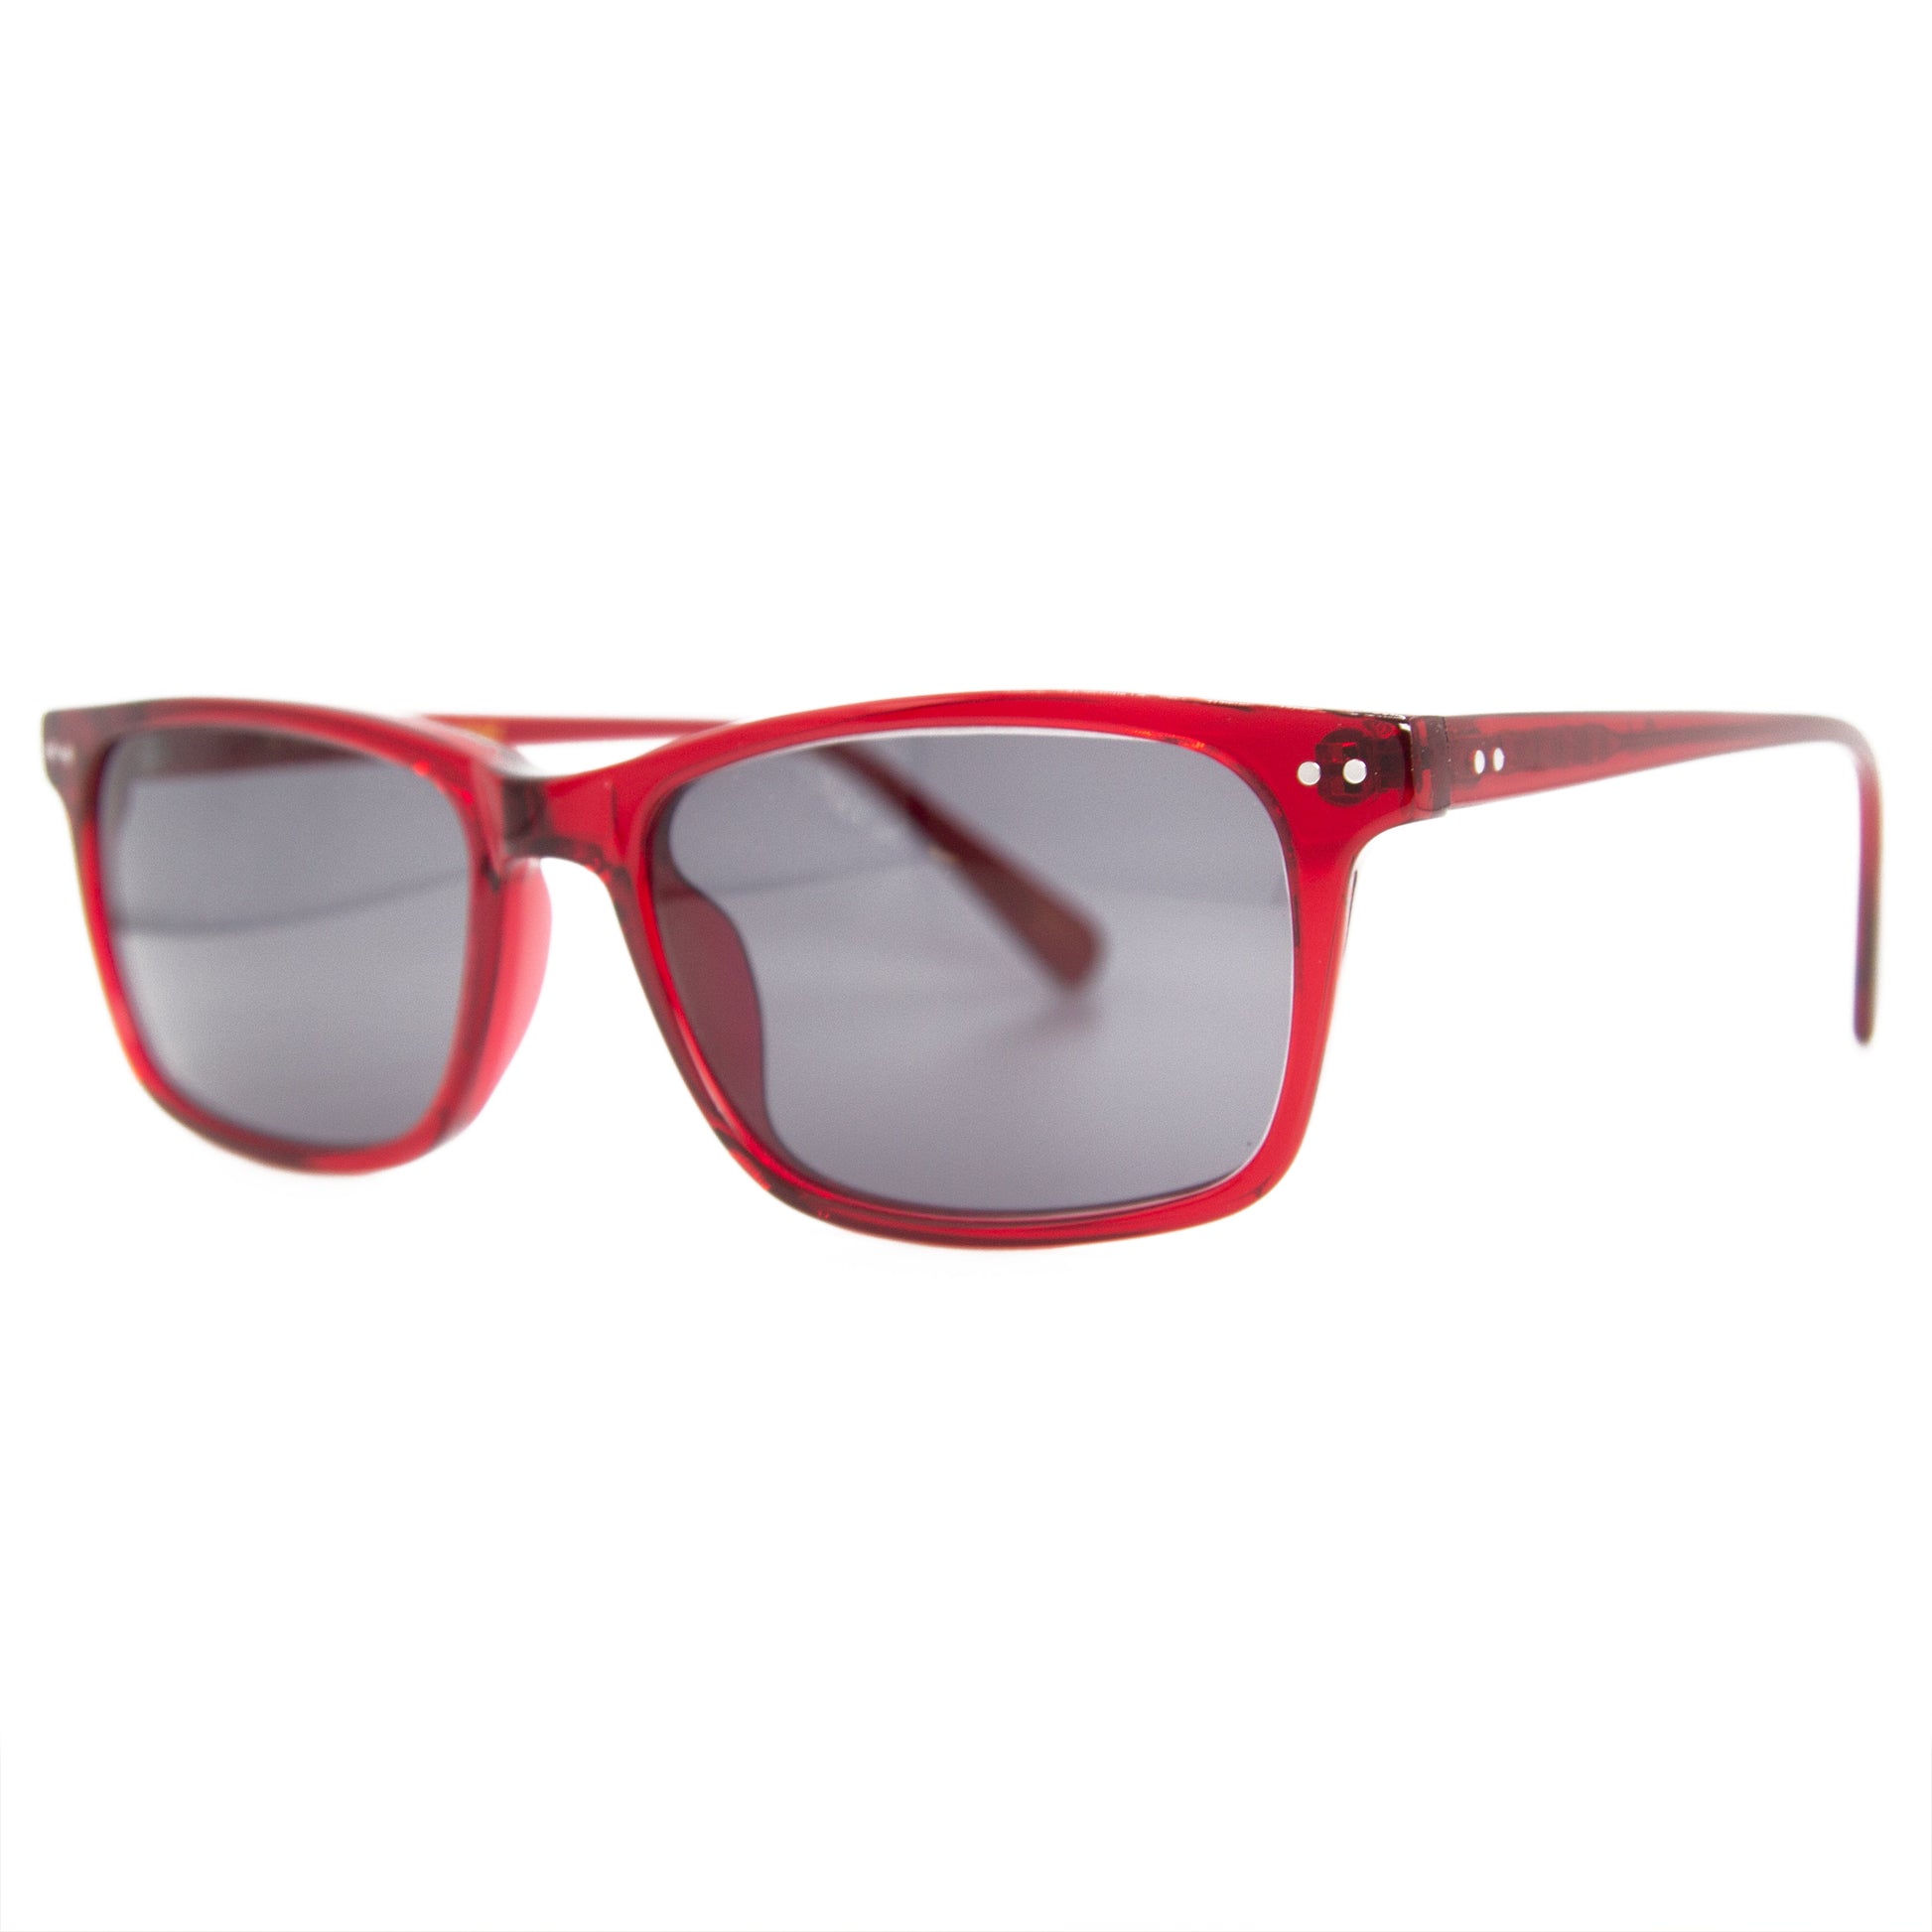 3 brothers - Mr Fred - Red - Prescription Sunglasses - Side